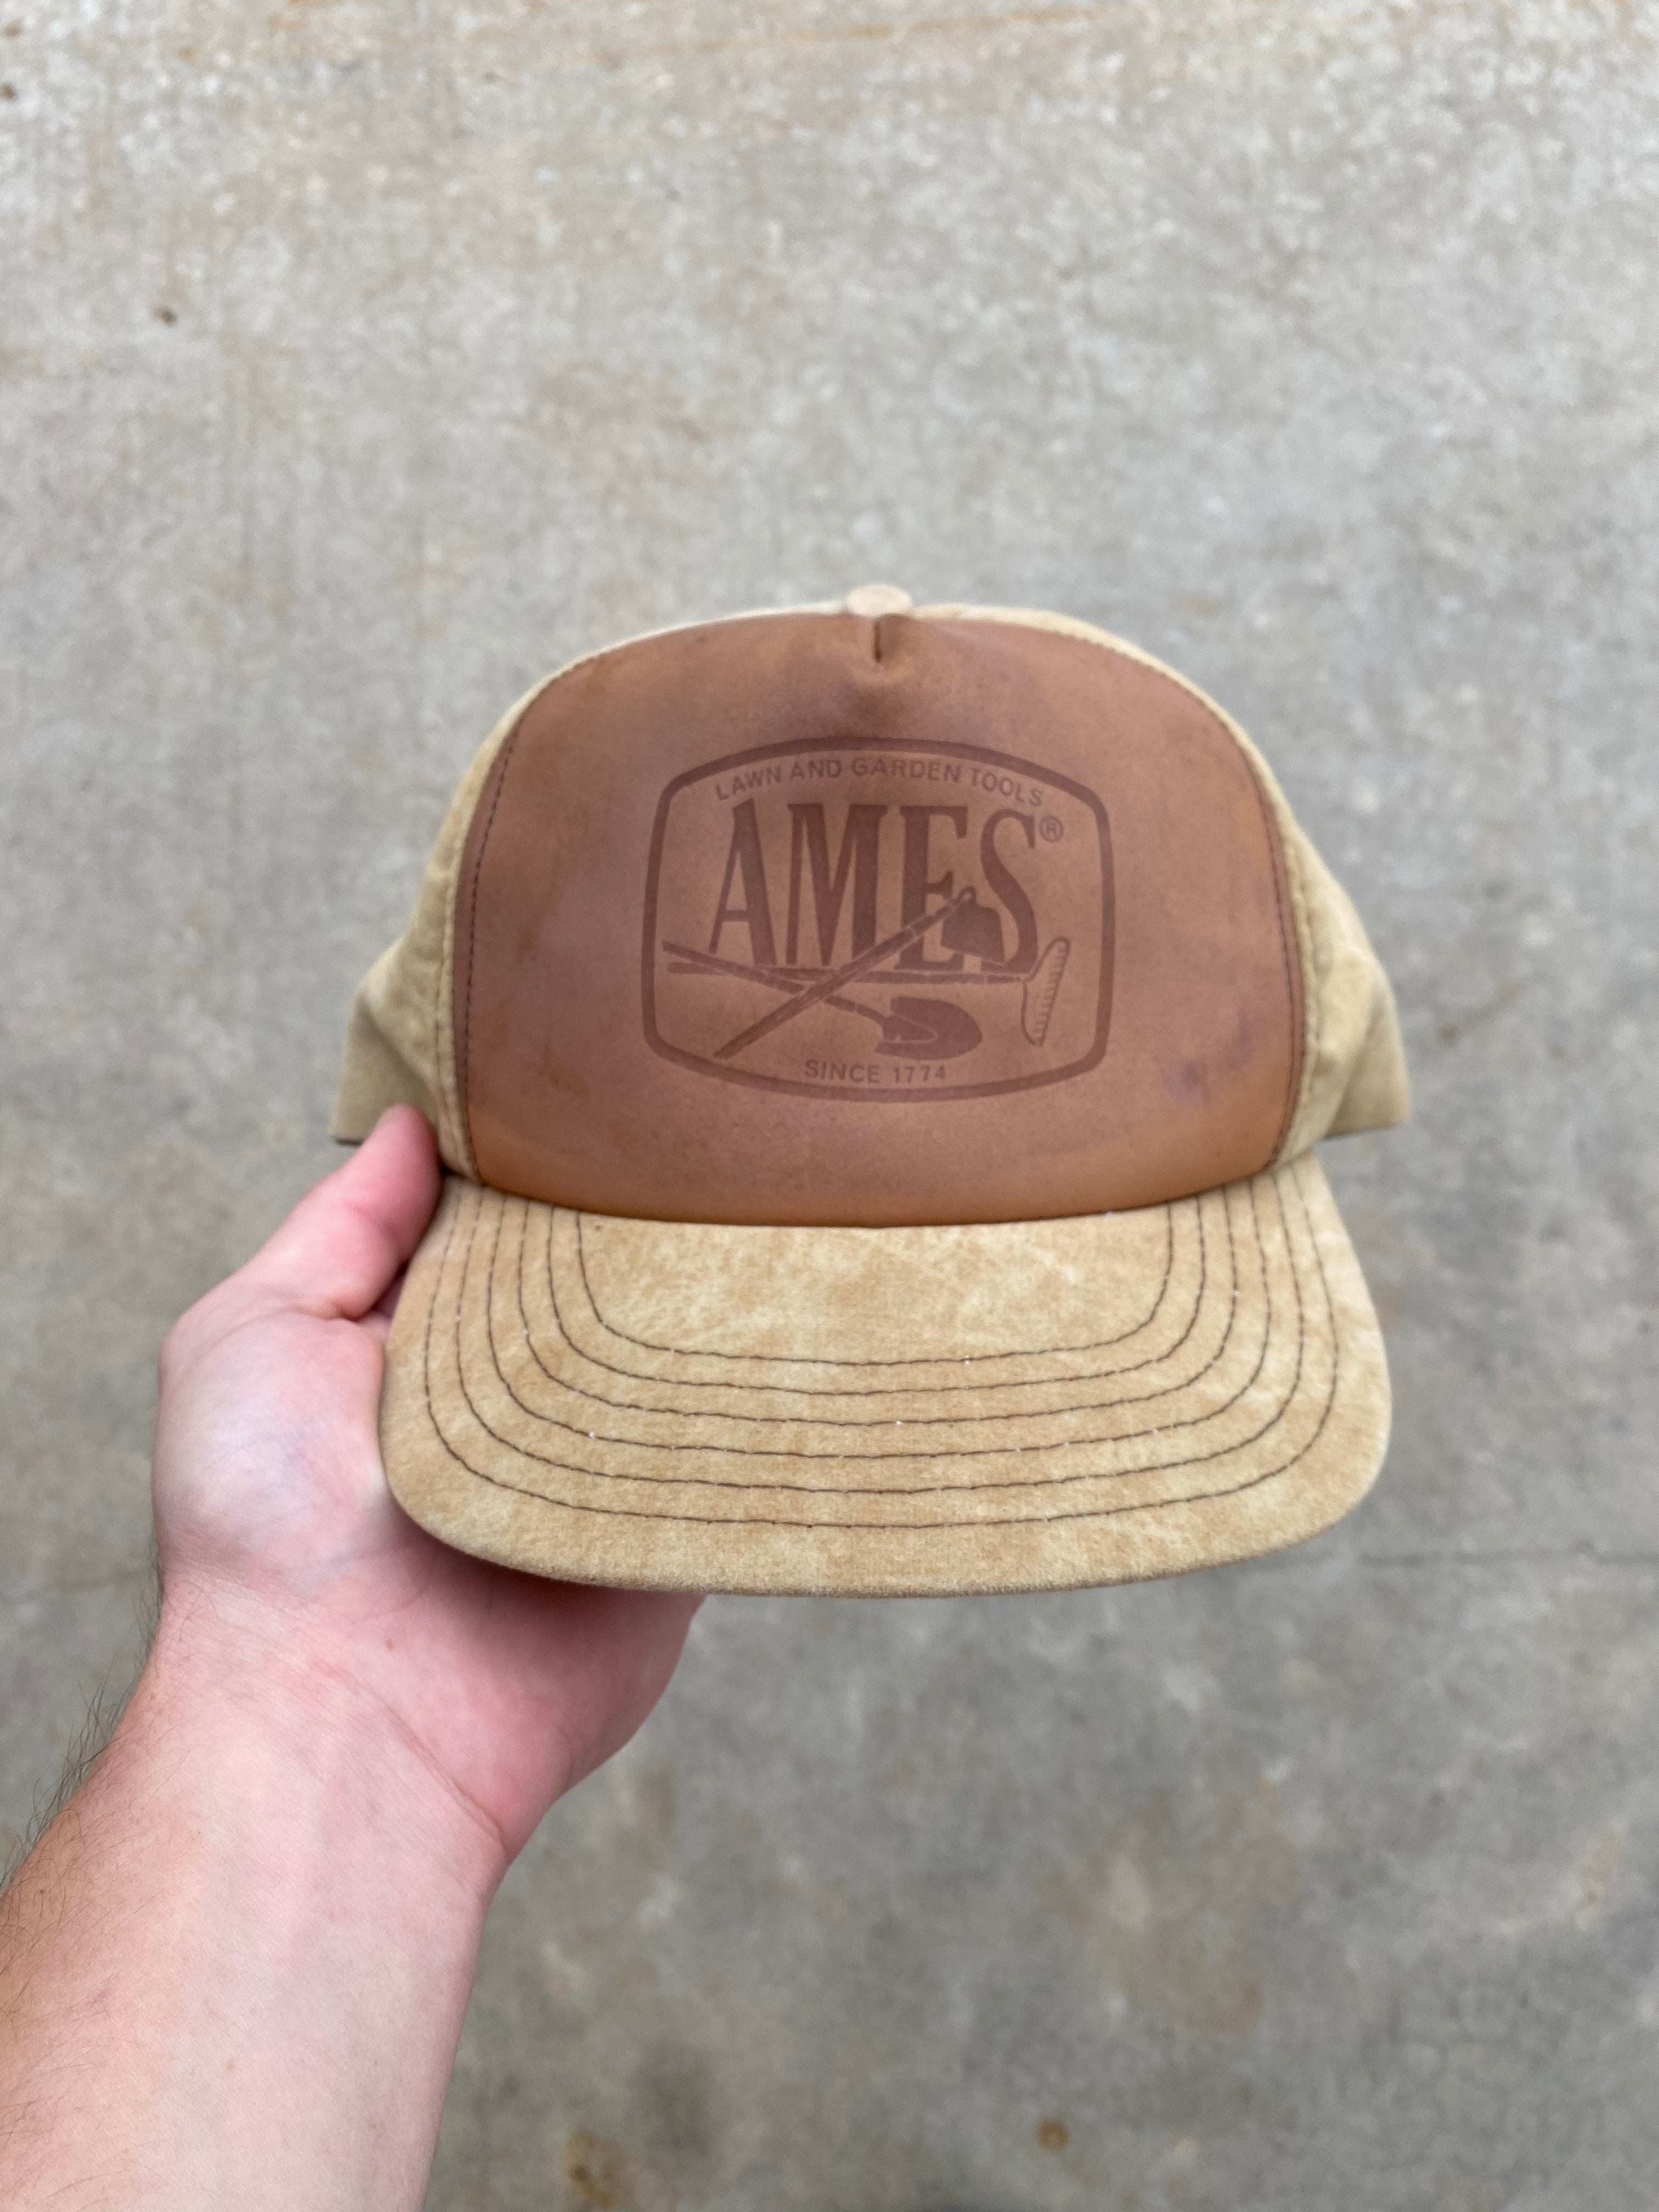 1980s Ames Lawn and Garden Tools Leather Snapback